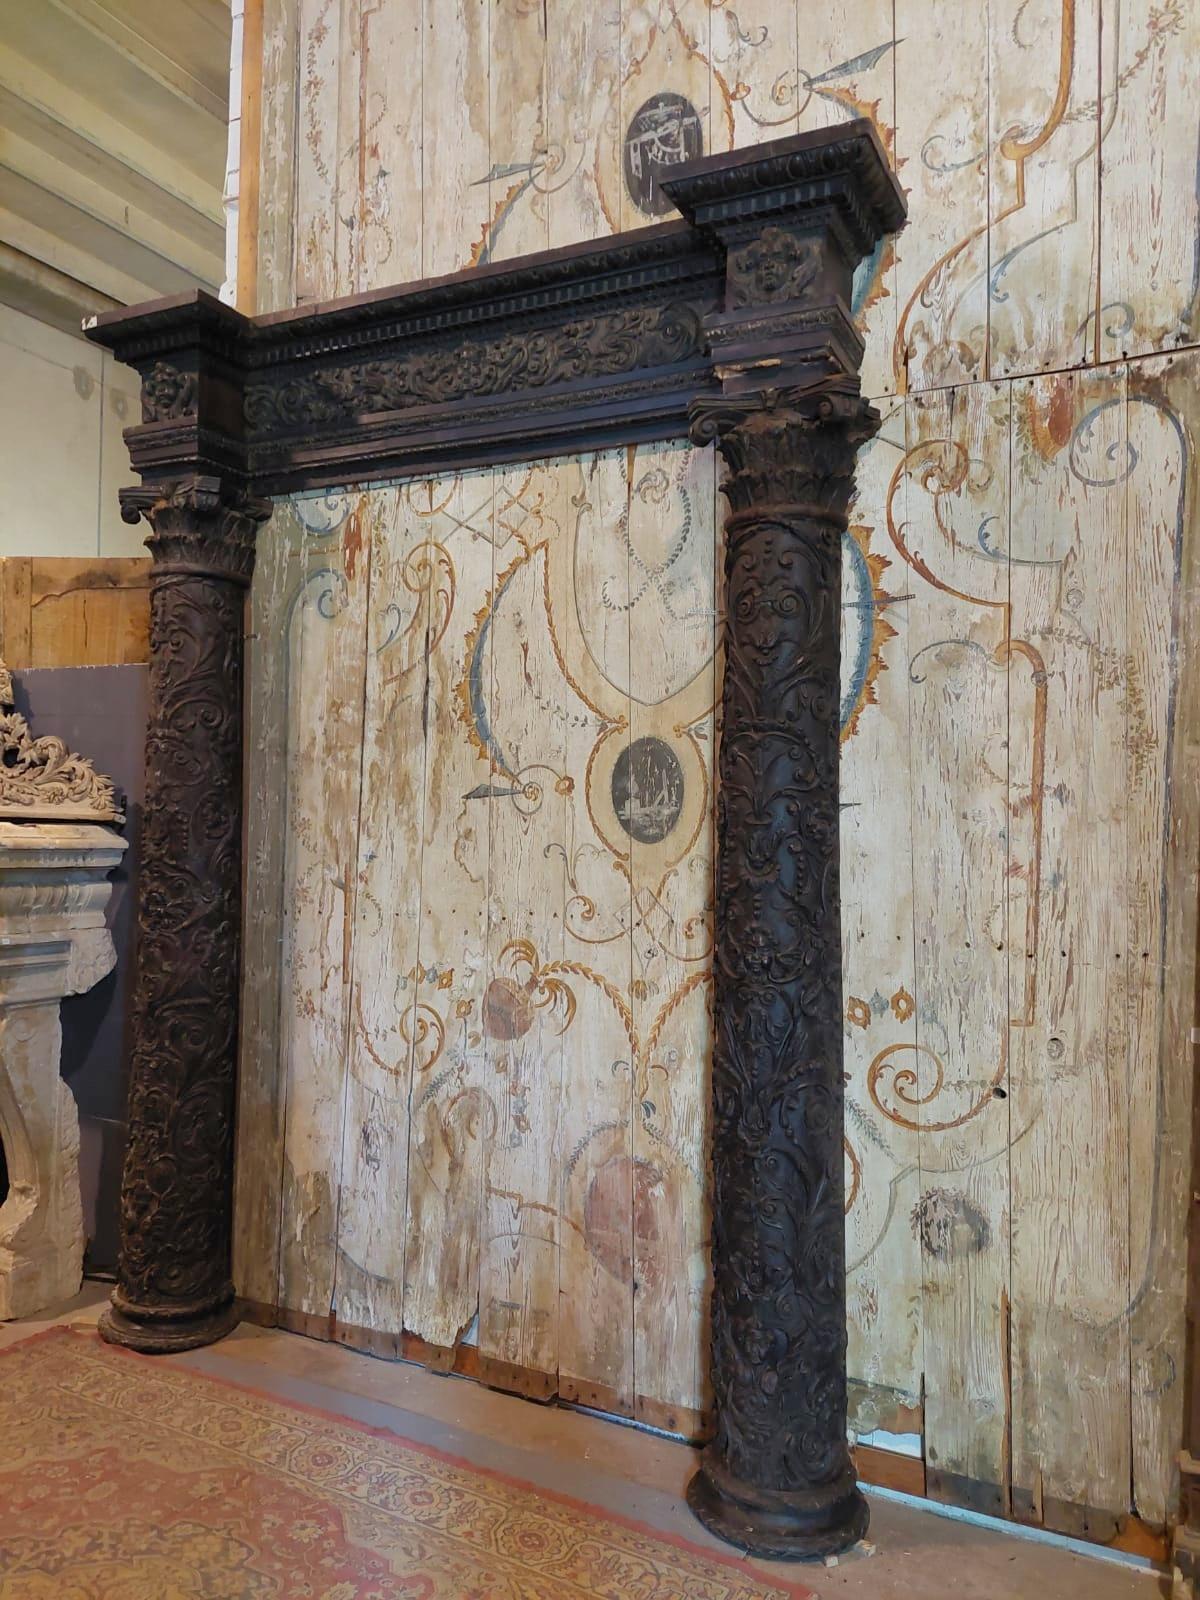 Very ancient and very important portal in walnut wood, richly carved by hand with bambocci and columns typical of the time, built entirely by hand by Italian artists in the 16th century, from Central Italy, Rome.
Of great value and undisputed